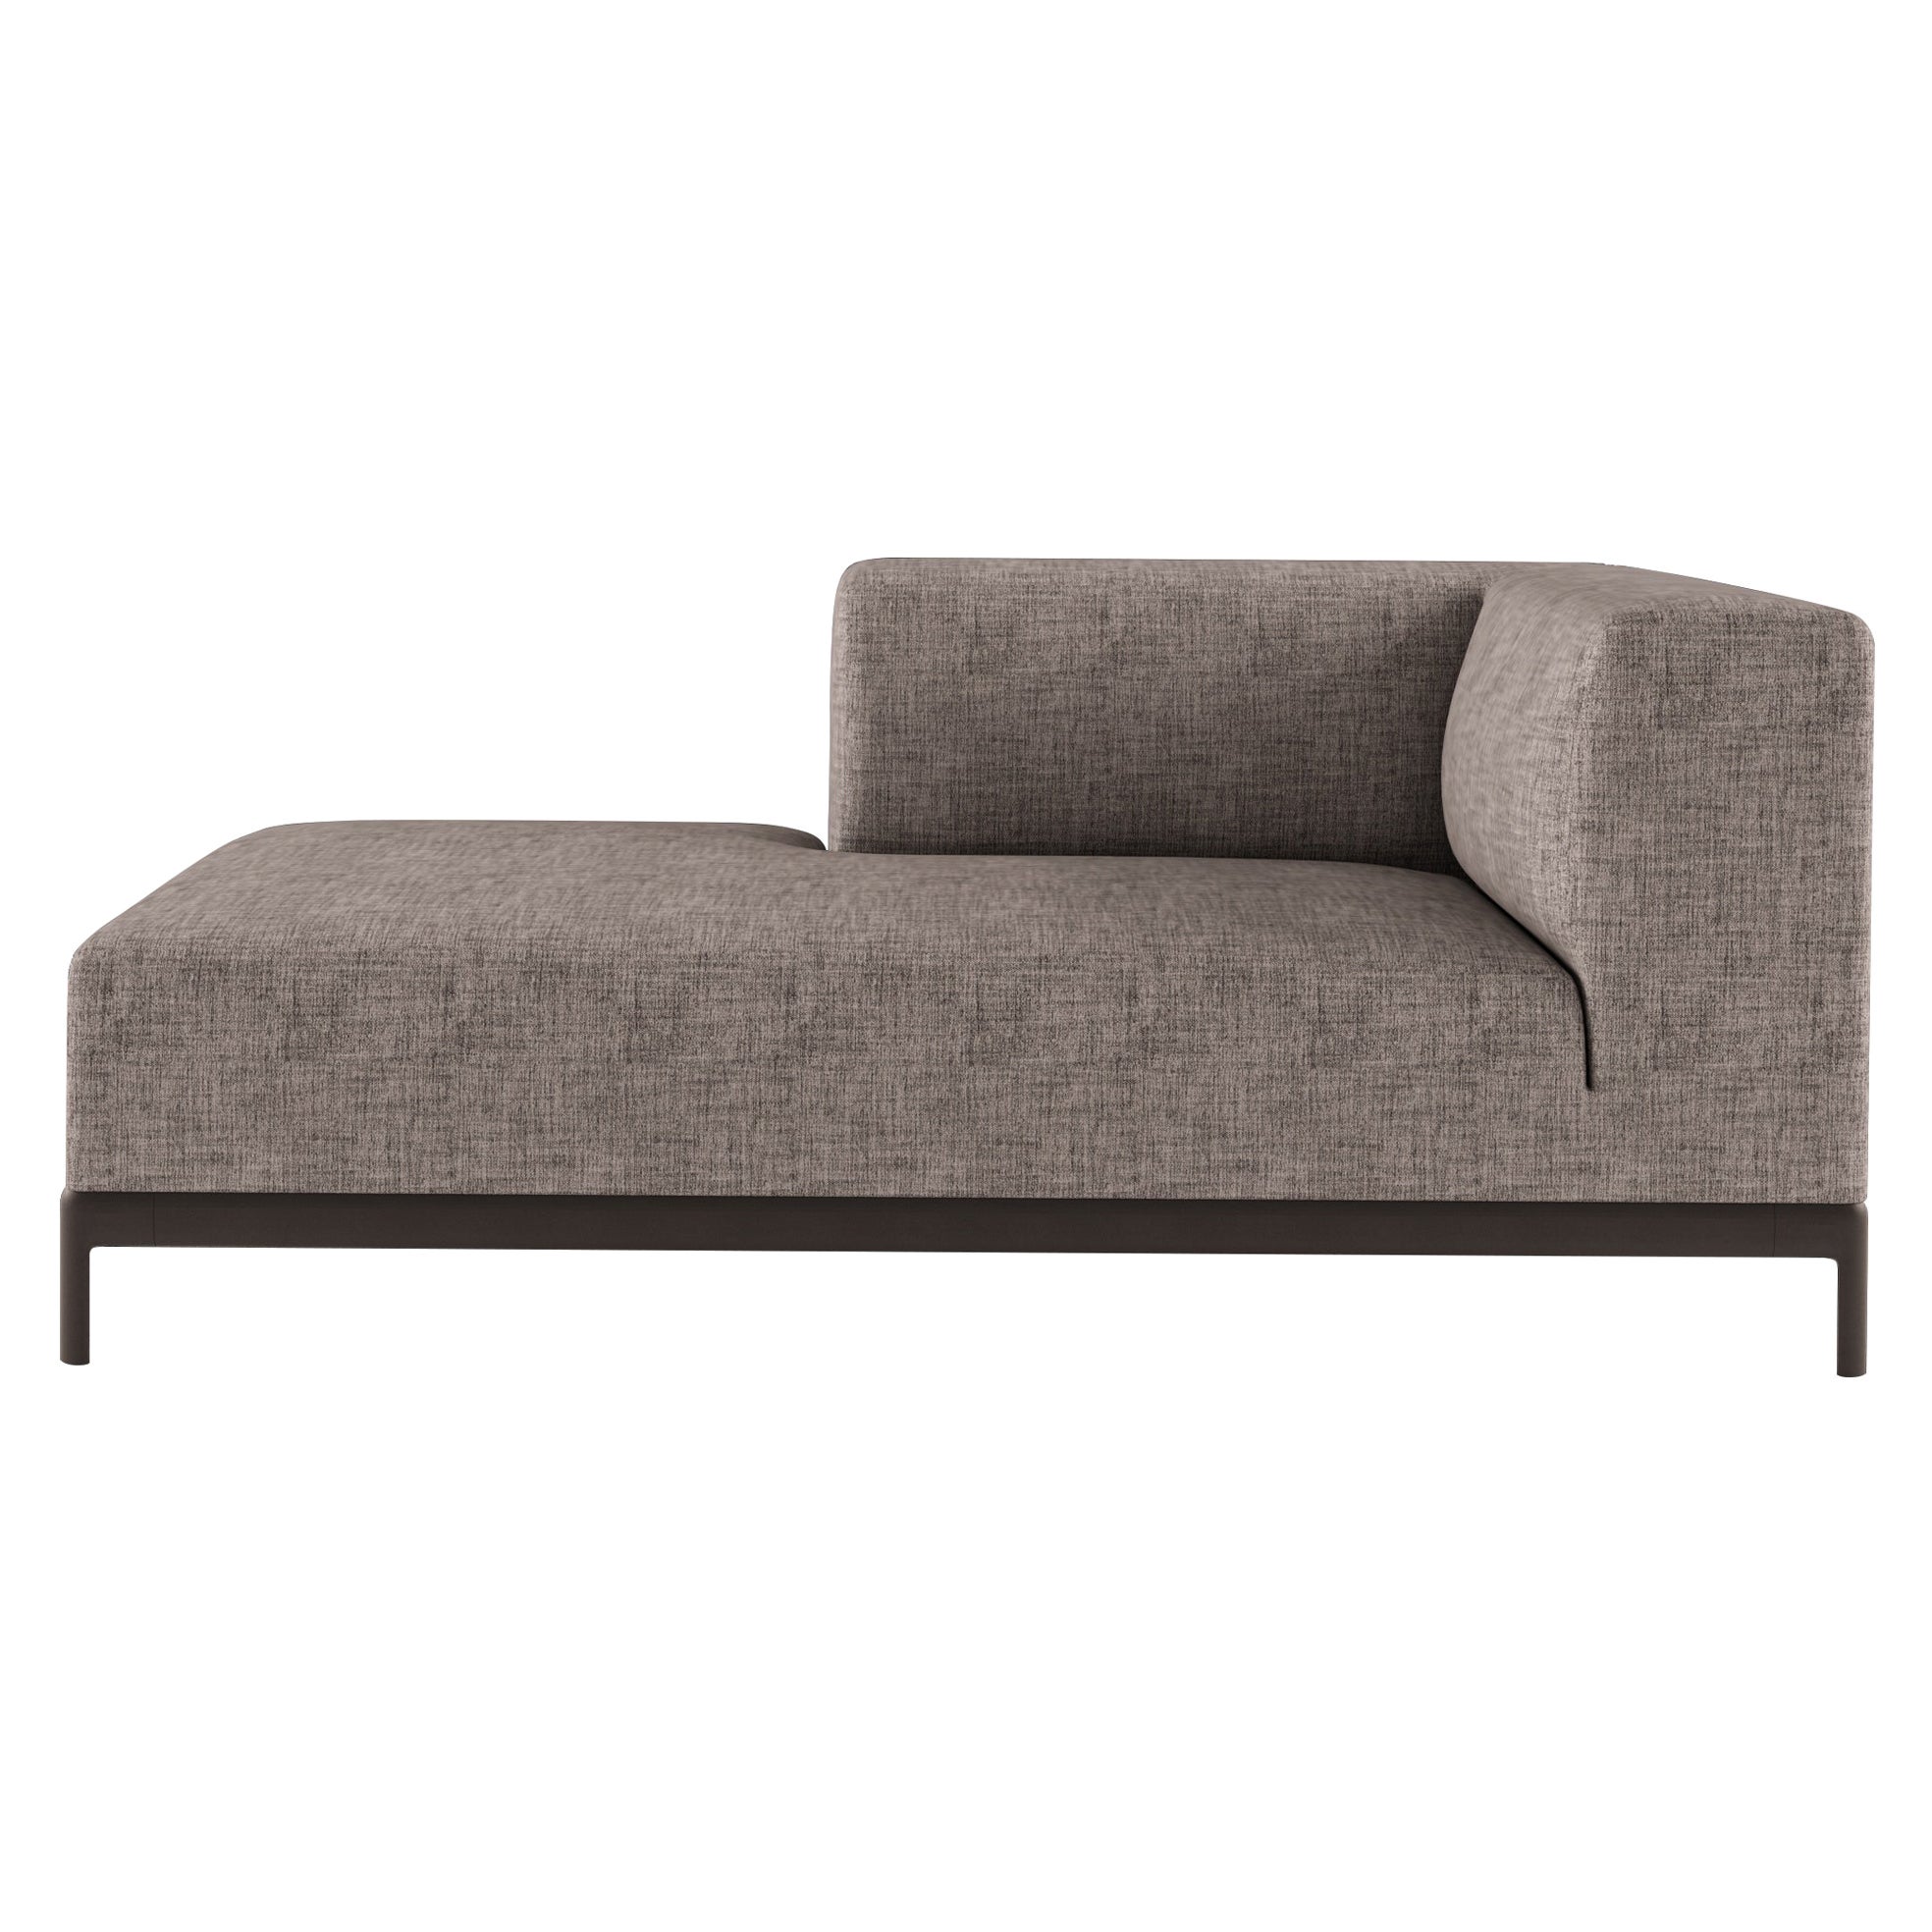 Alias P39 AluZen Soft Ending Sofa with Upholstery and Lacquered Aluminum Frame